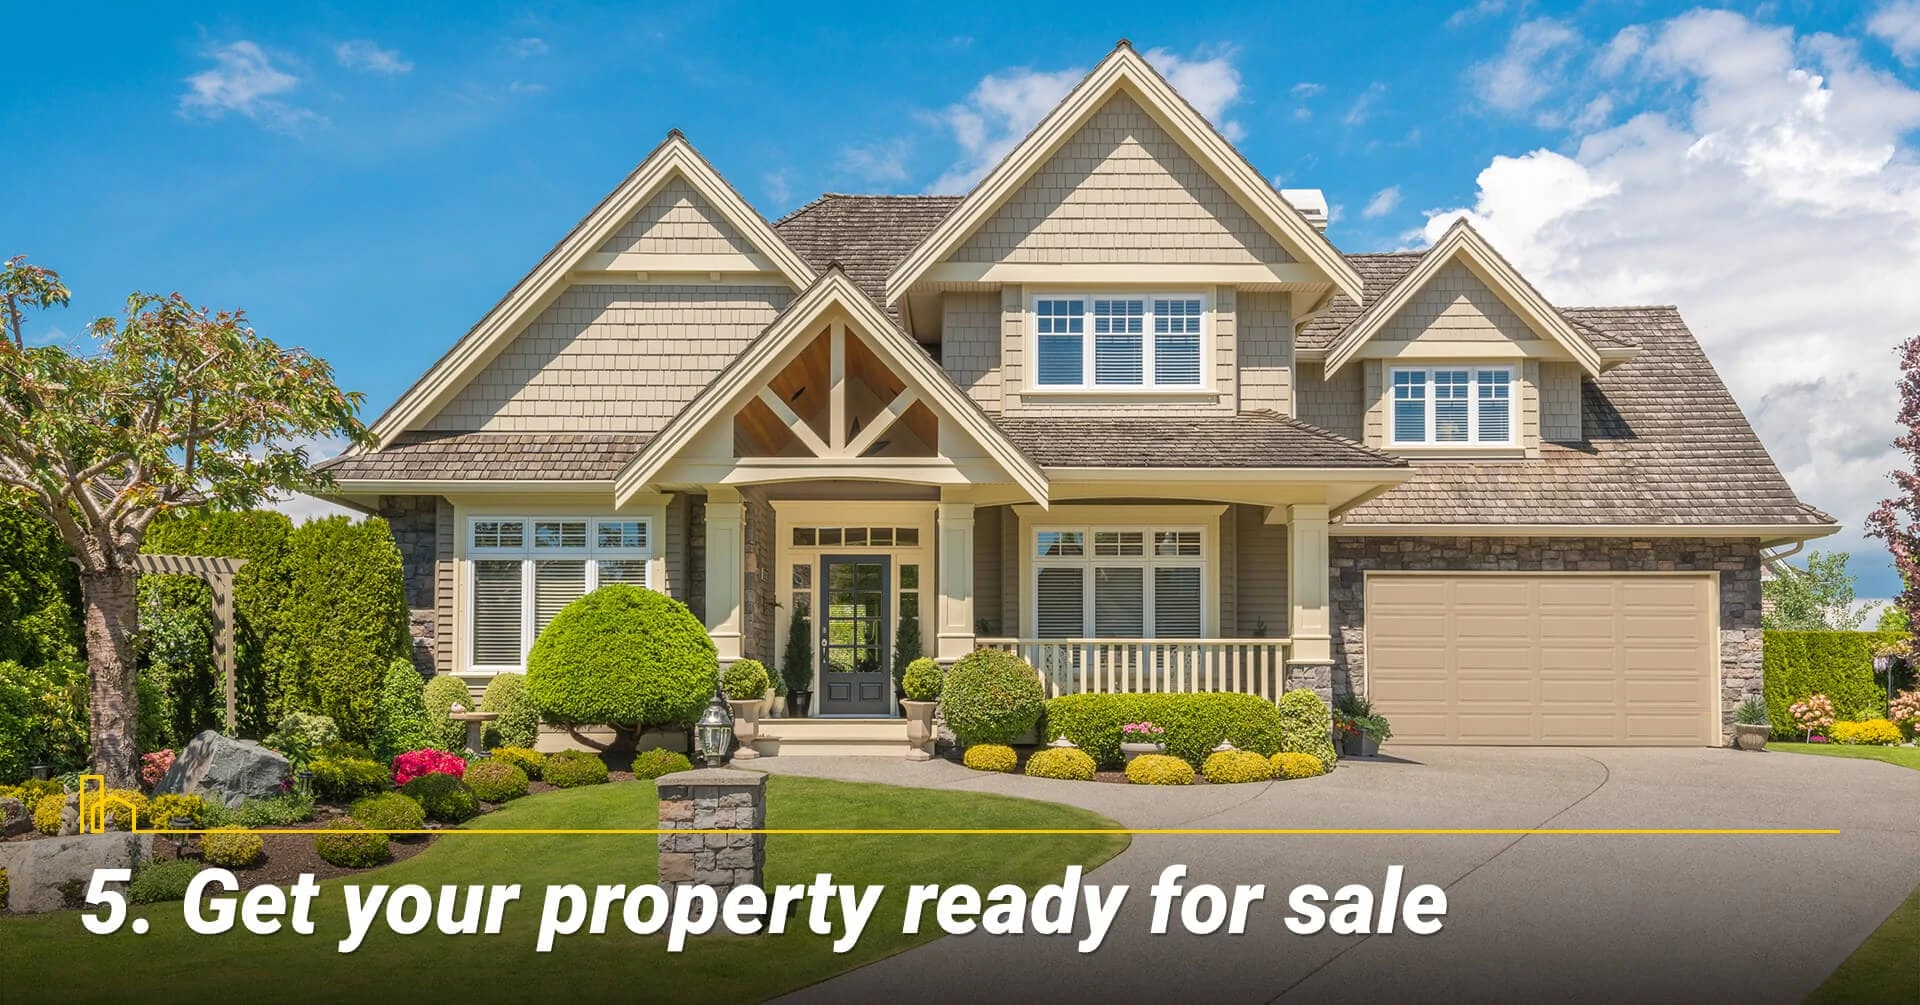 Get your property ready for sale, prepare your home well for listing